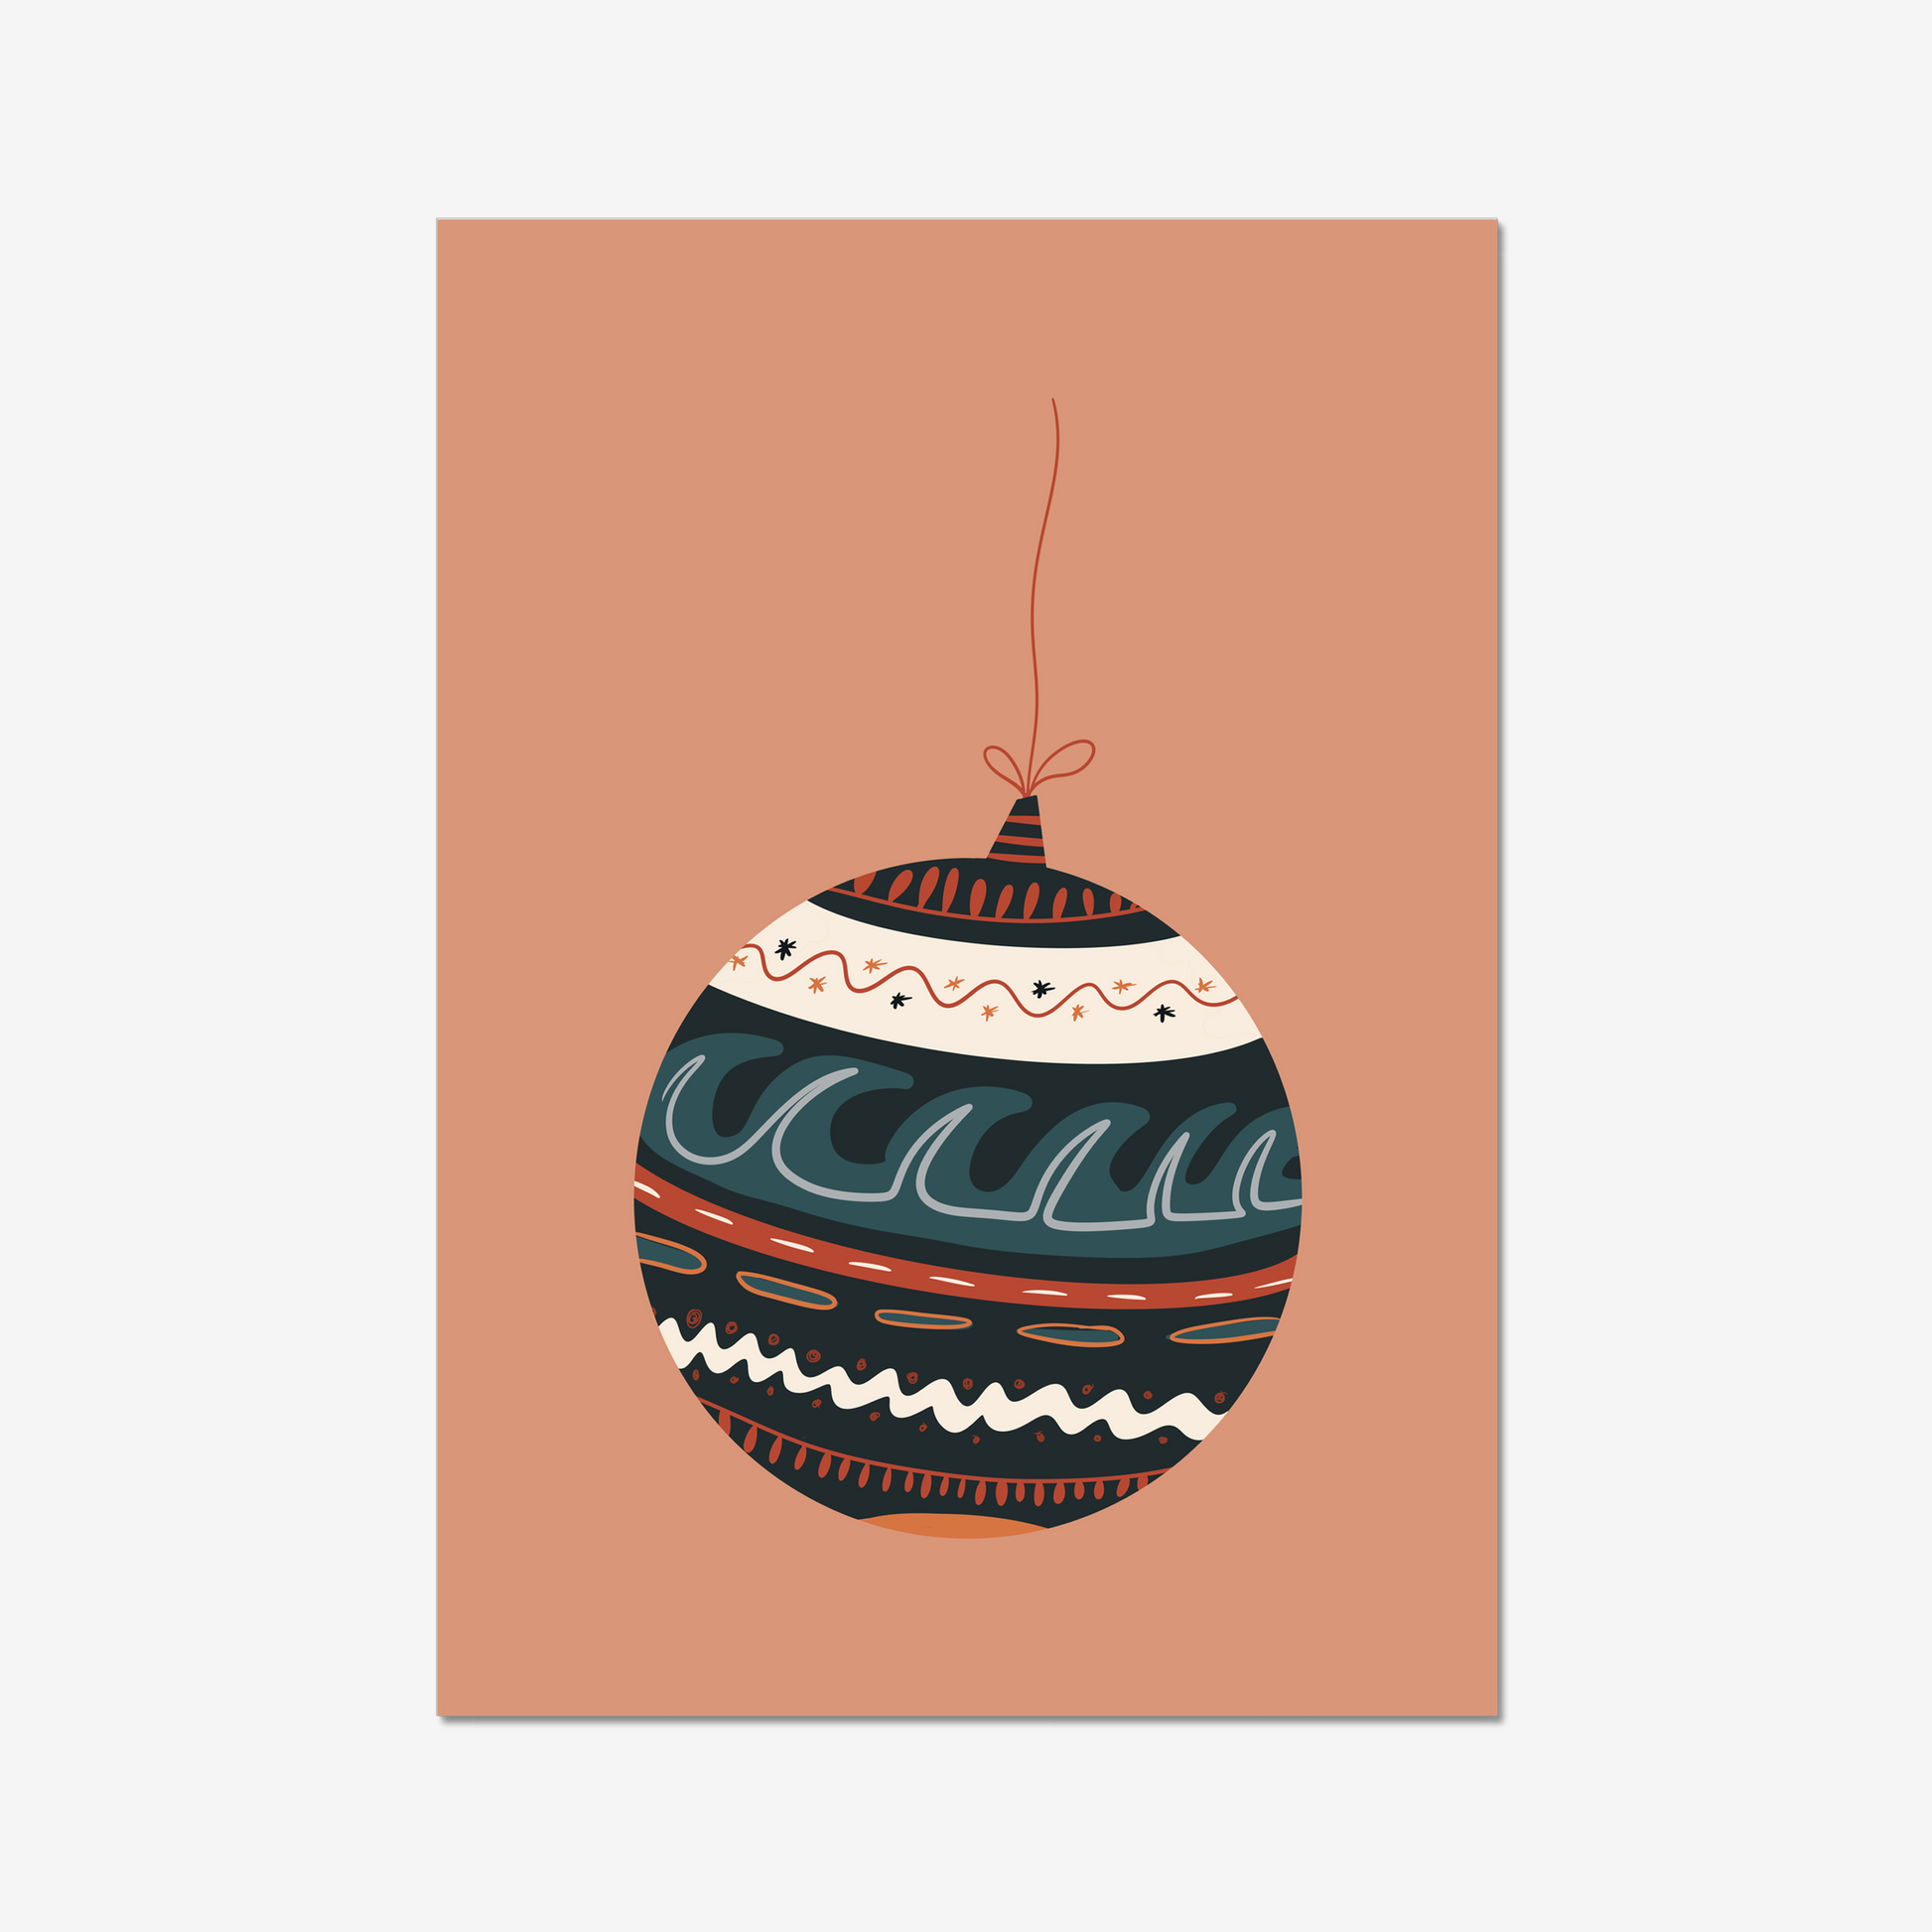 Check out our Boho Christmas Bauble Art Print Poster! This fun and festive print is perfect for adding a touch of bohemian flair to your holiday decor. Plus, it makes a great gift for the boho chic friend in your life!